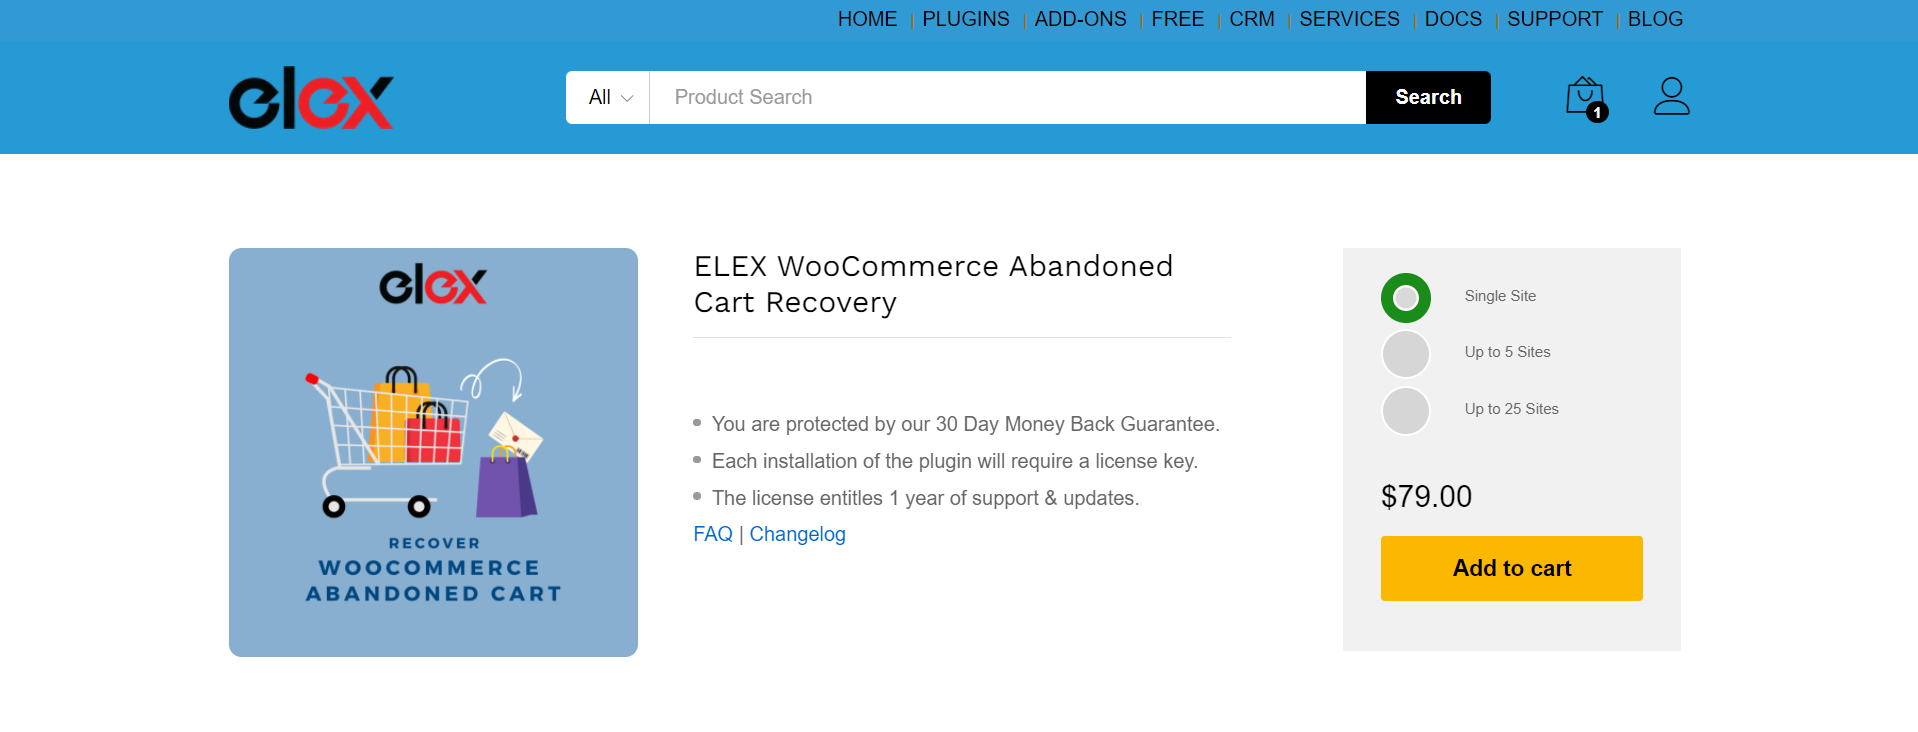 ELEX Abandoned Cart plugin product page with a price of $79